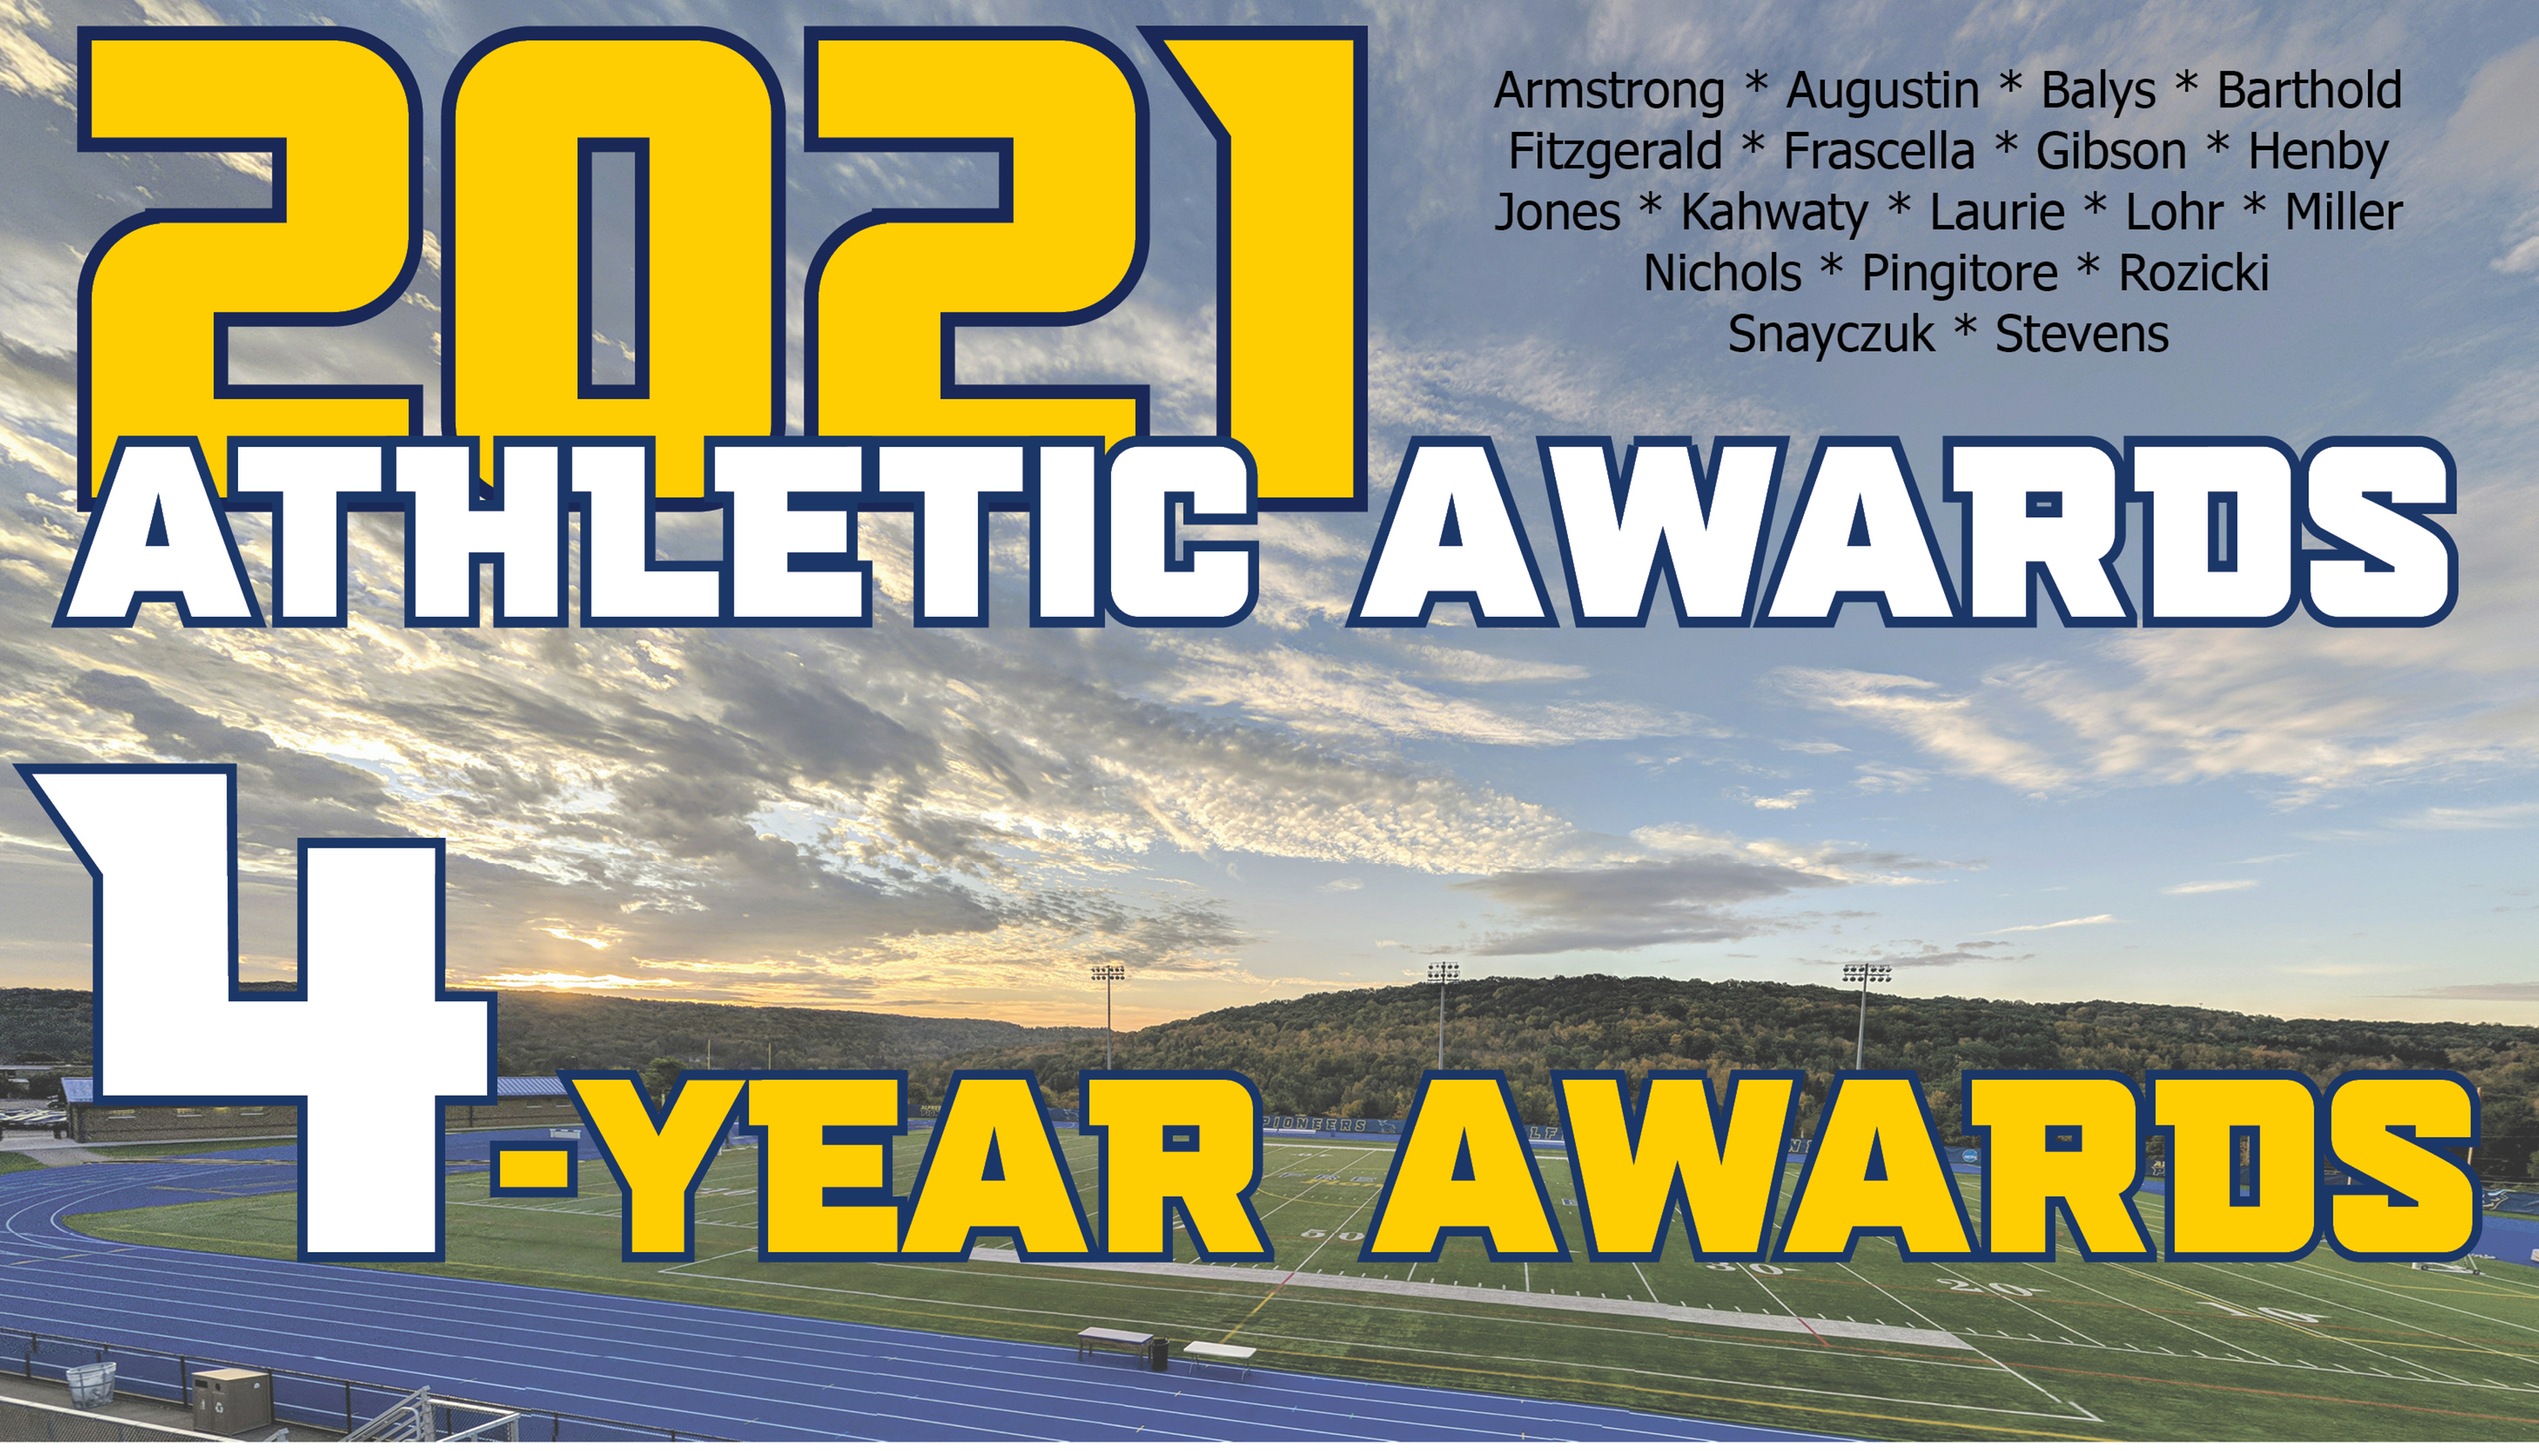 Picture of Pioneer Stadium at sunrise! 

Release features information on 4-Year Award winners.